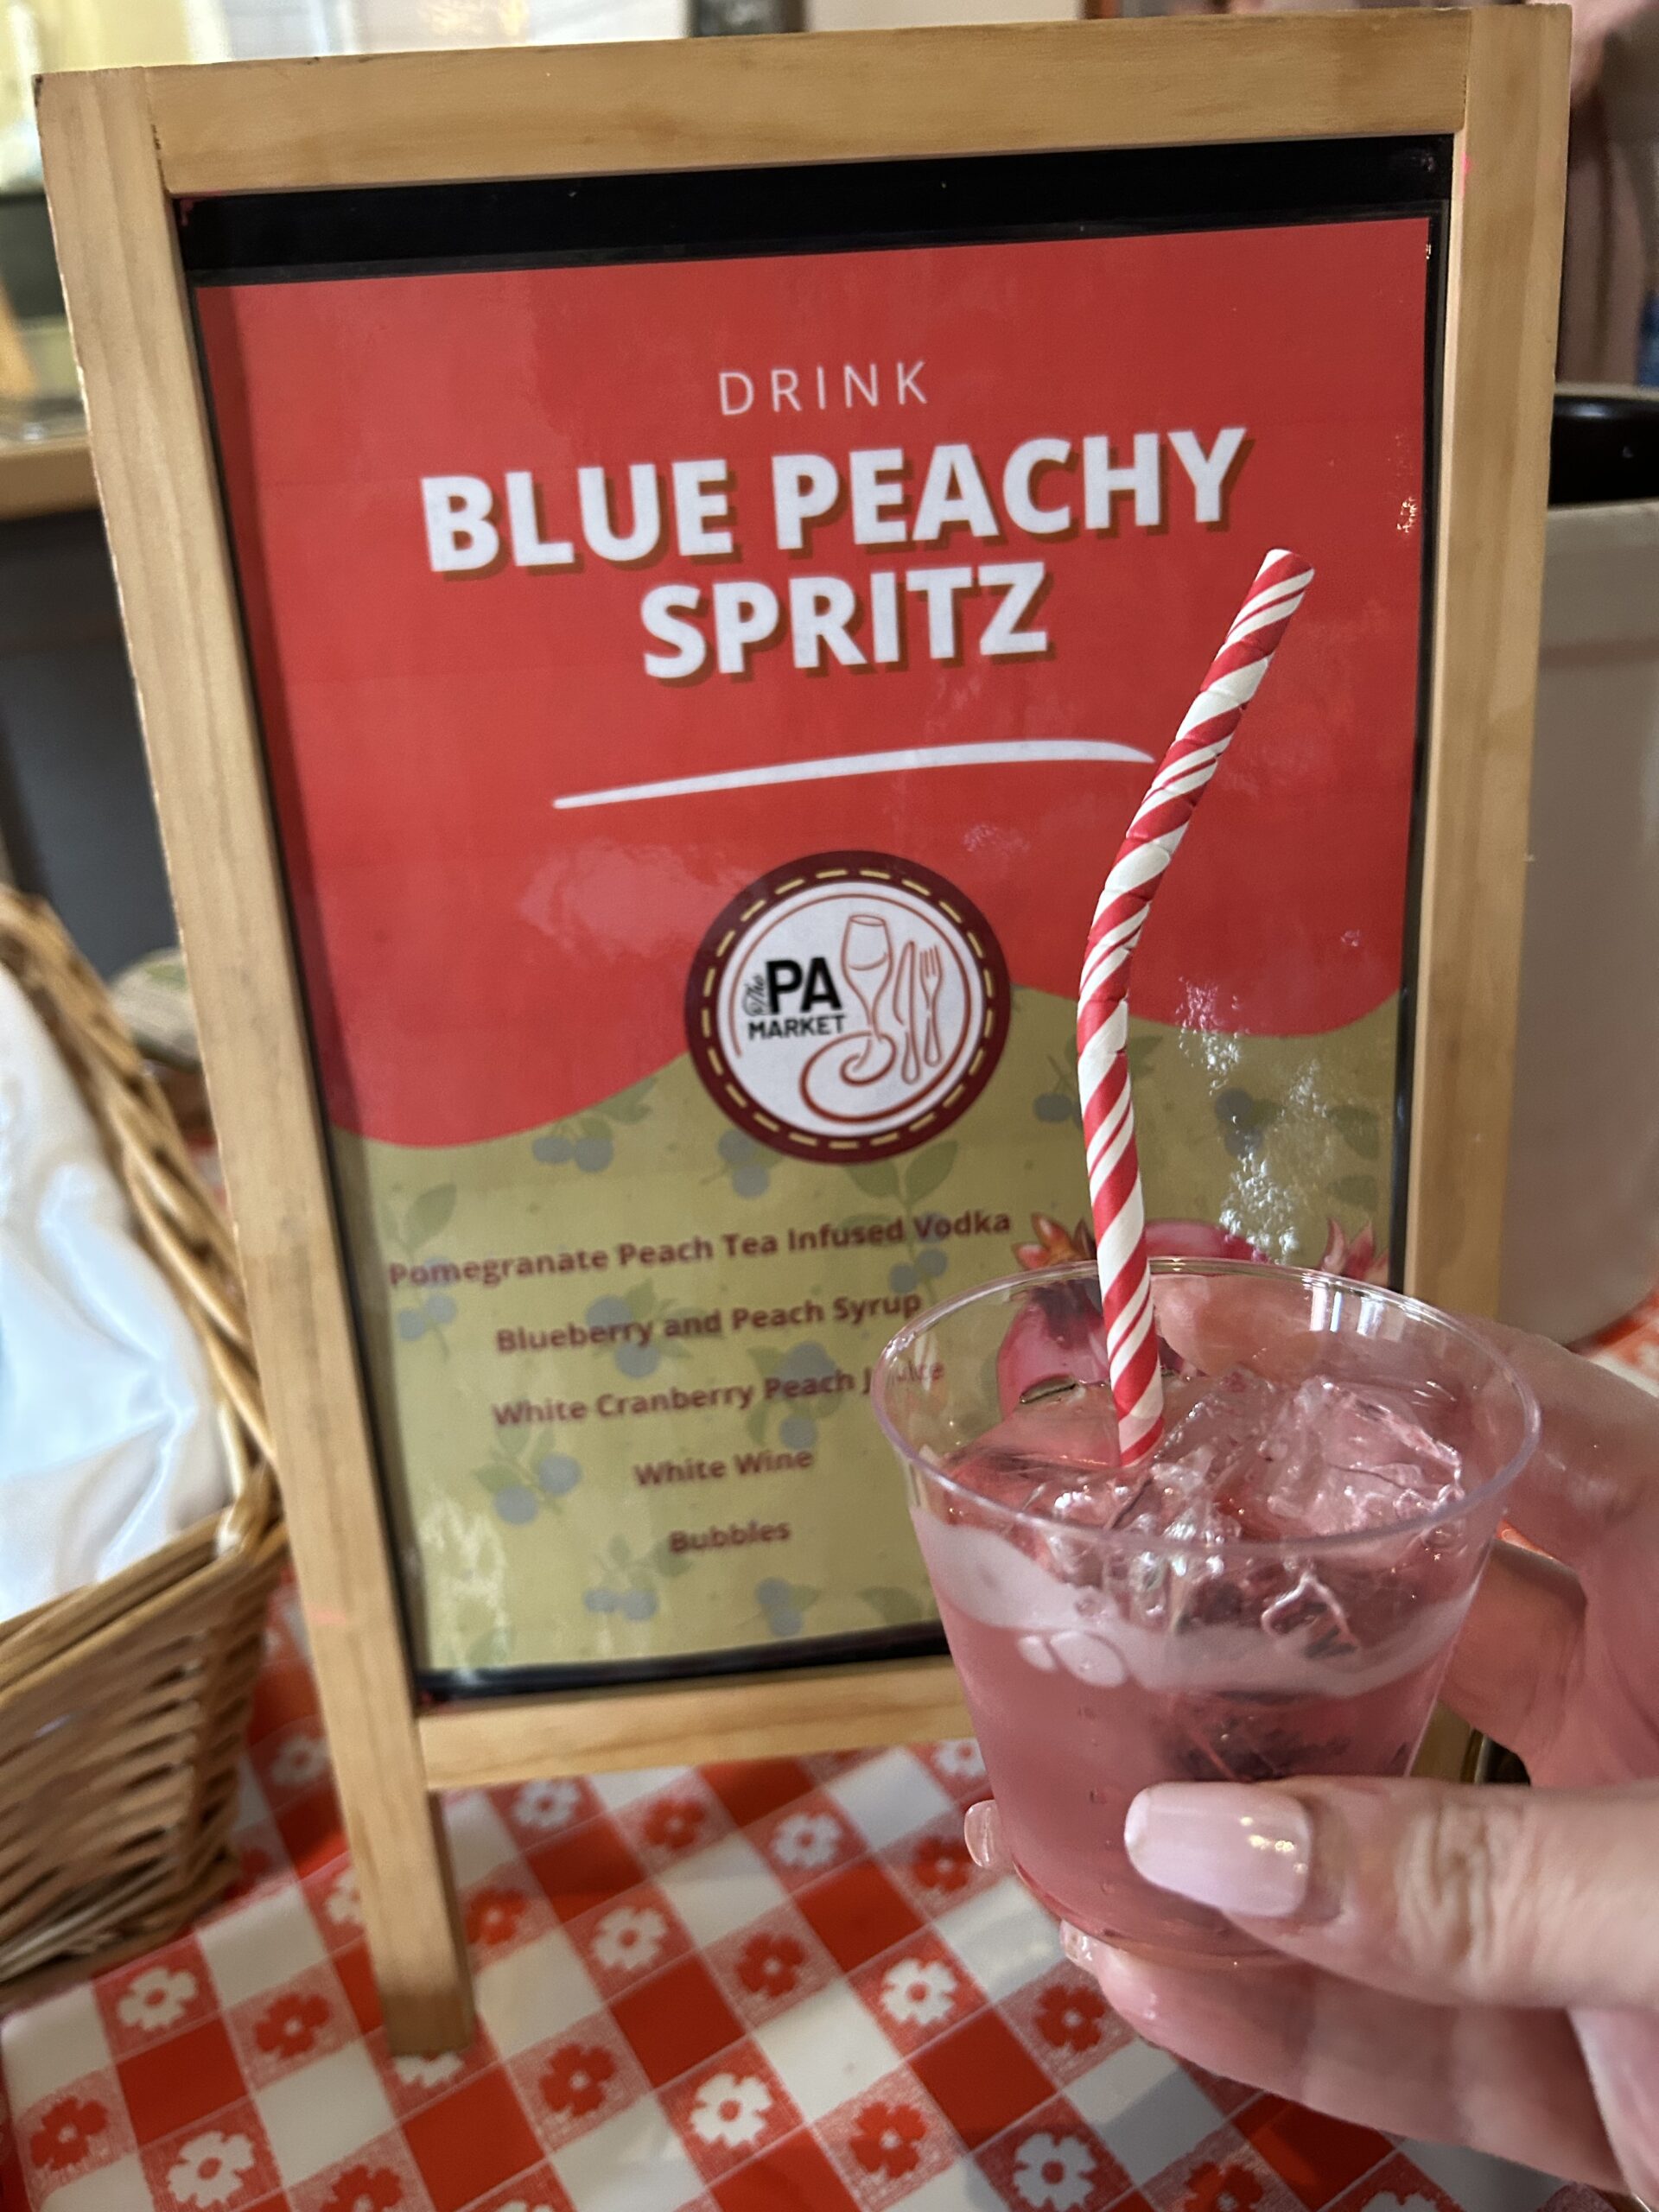 A photo of the Blue Peachy Spritz sample drink and a sign with the ingredients.